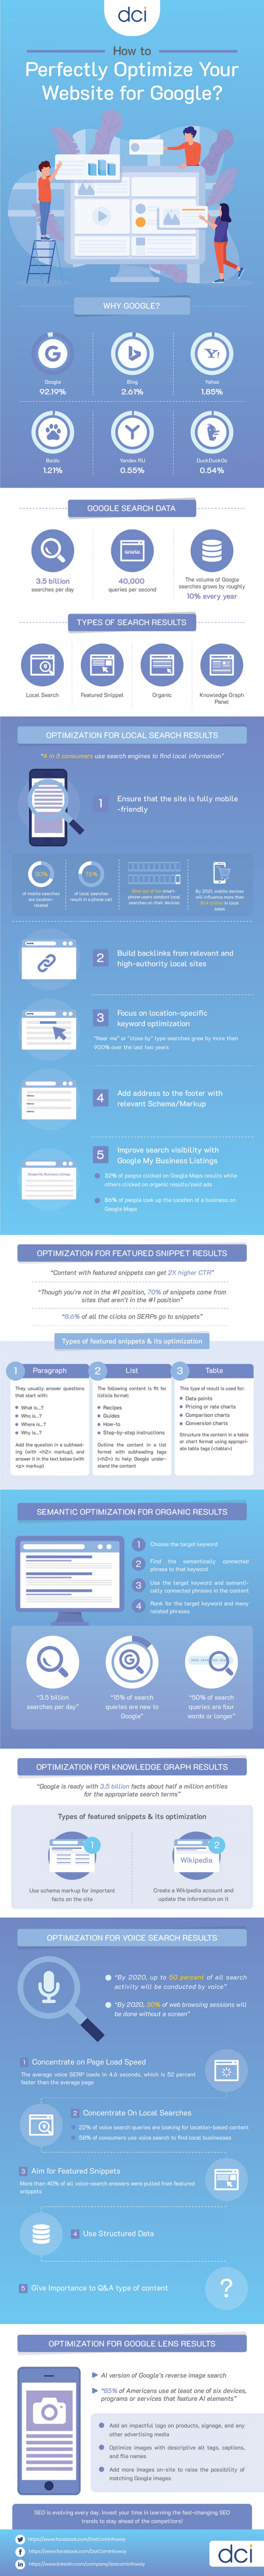 Infographic: How to Perfectly Optimize Your Website for Google? Infographic